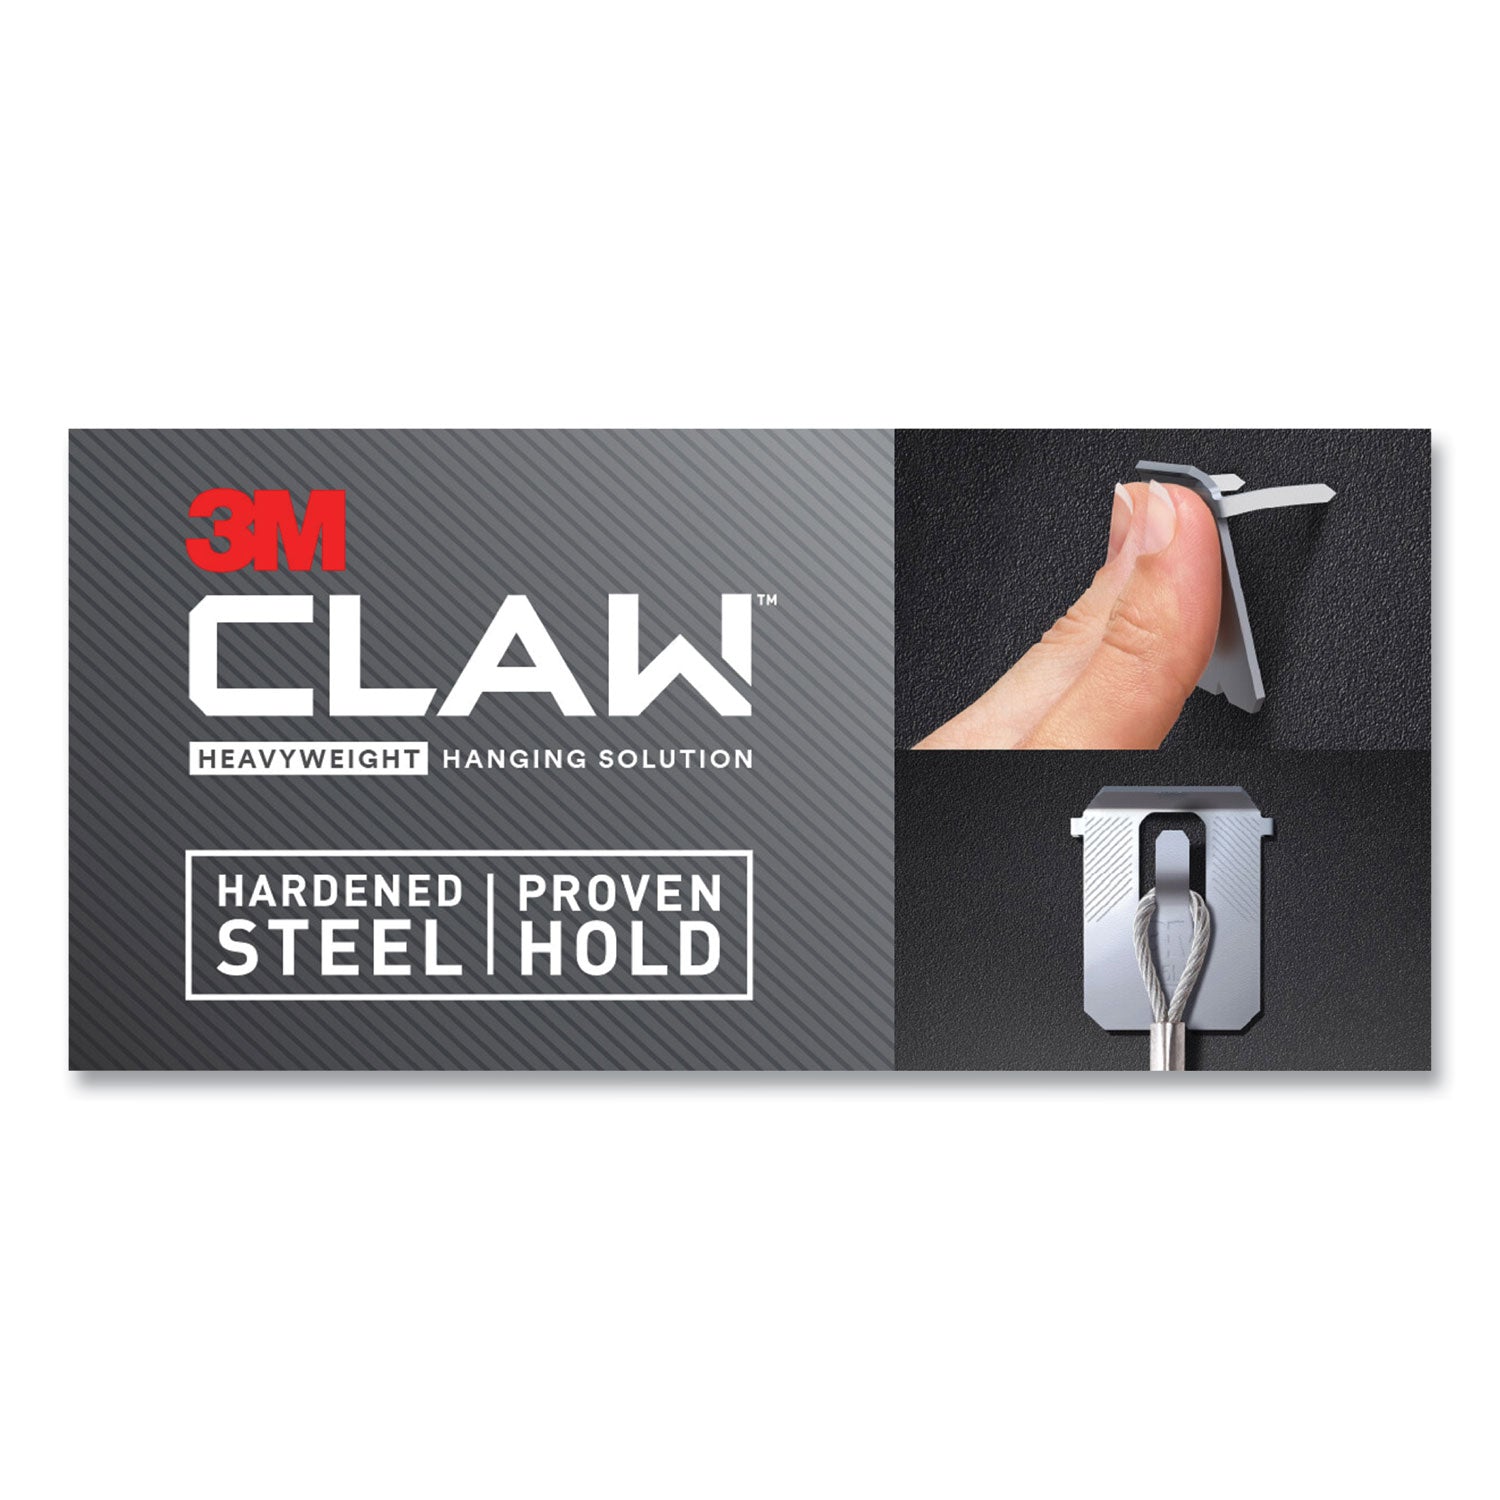 claw-drywall-picture-hanger-stainless-steel-45-lb-capacity-3-hooks-and-3-spot-markers_mmm3ph45m3es - 7